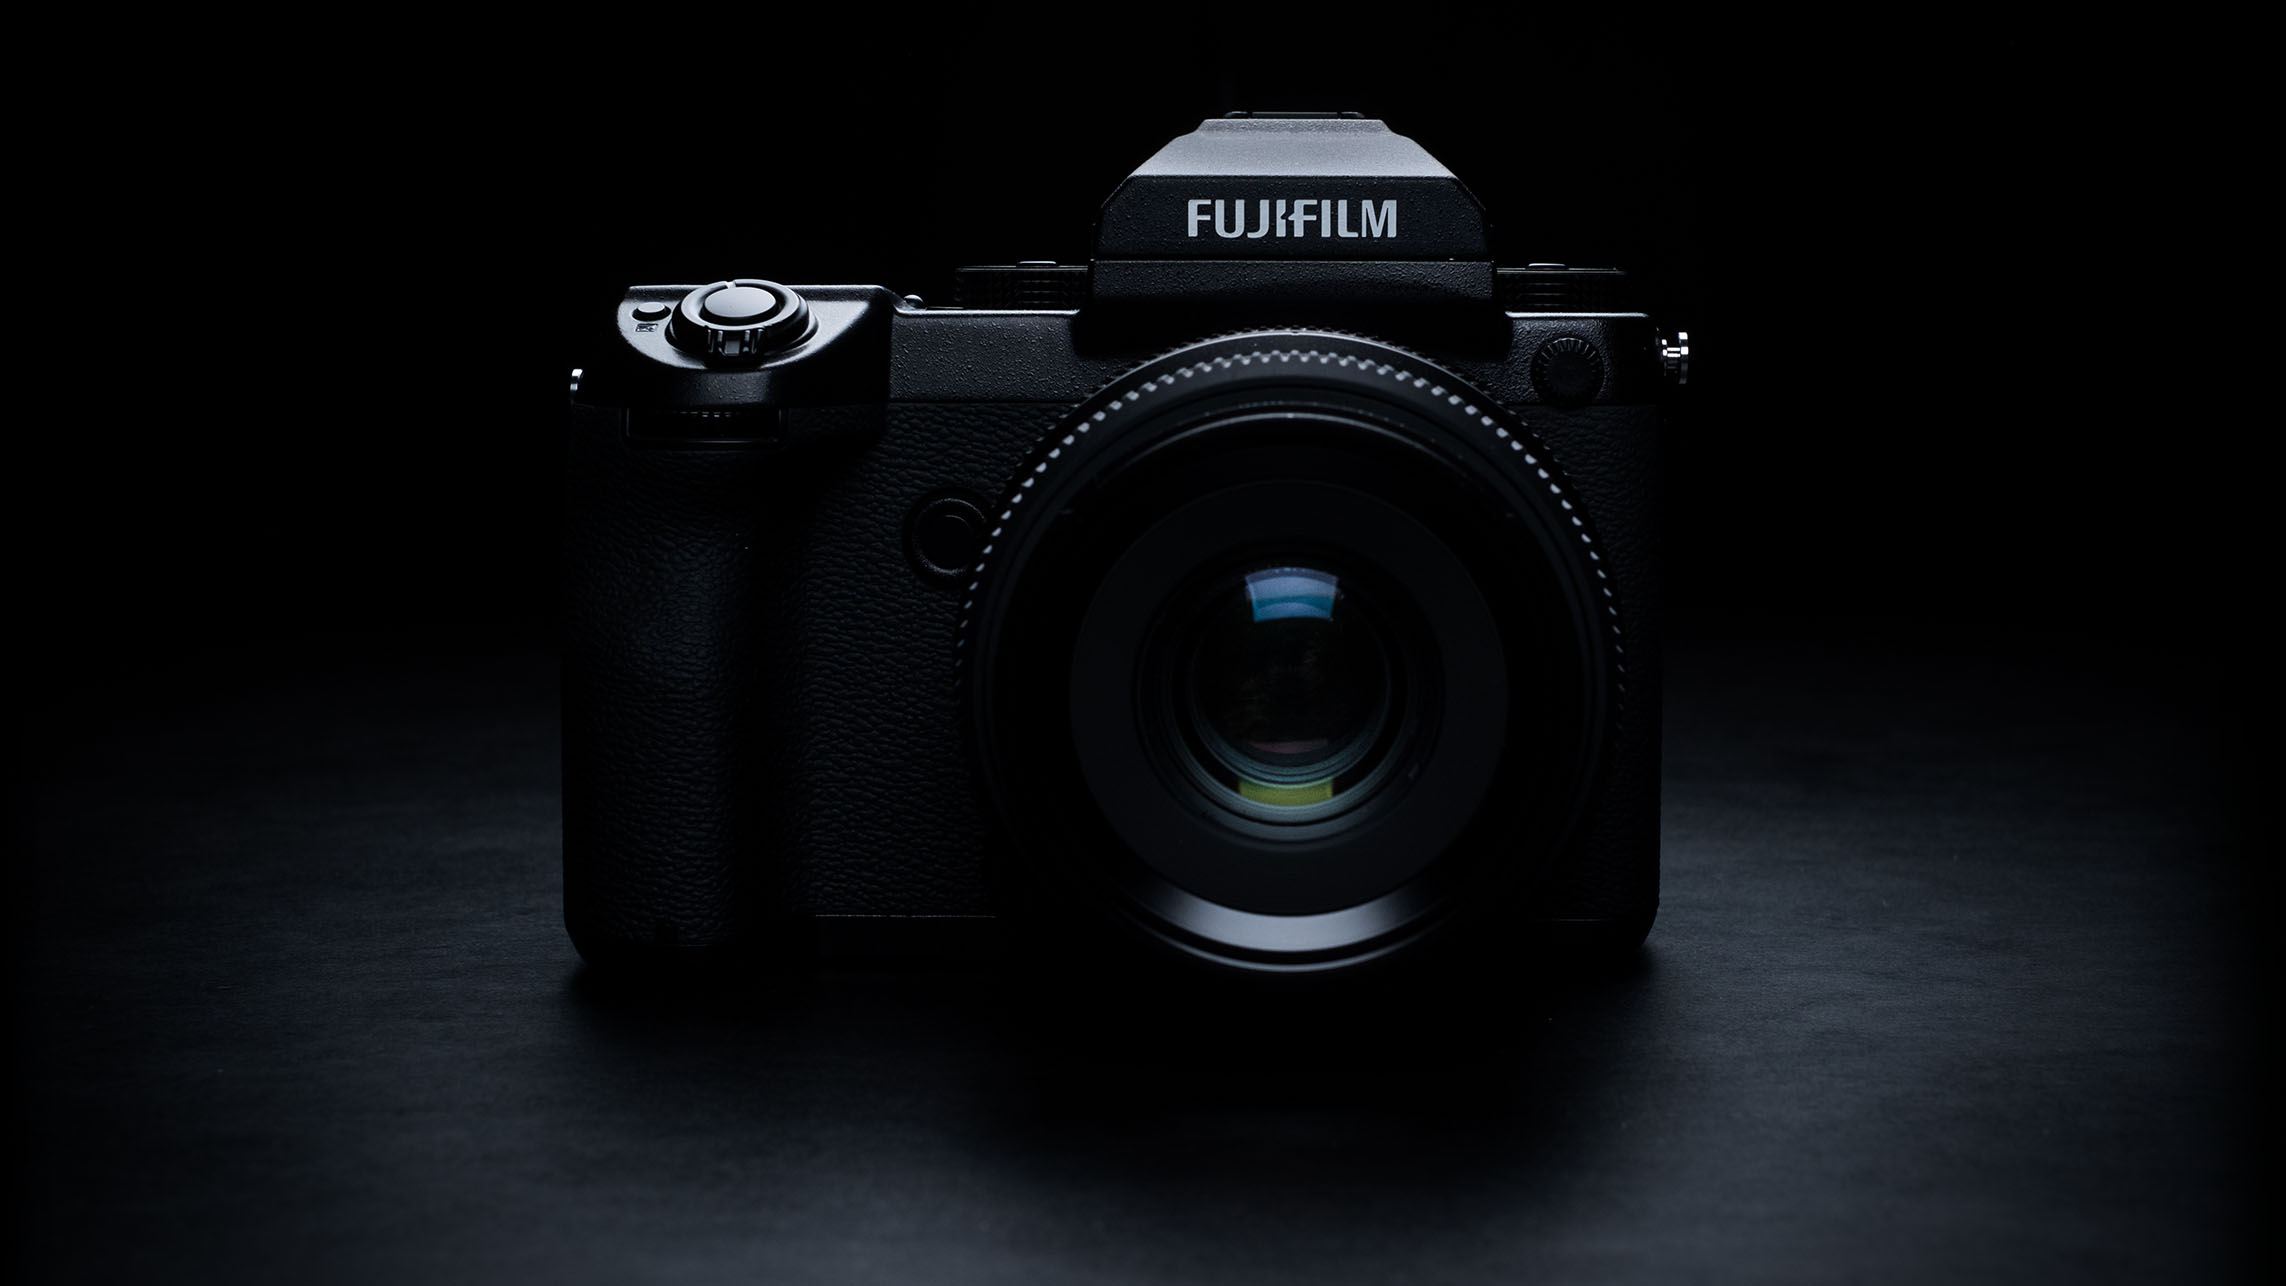 Fujifilms Gfx 50r Could Be The First Truly Affordable Medium Format